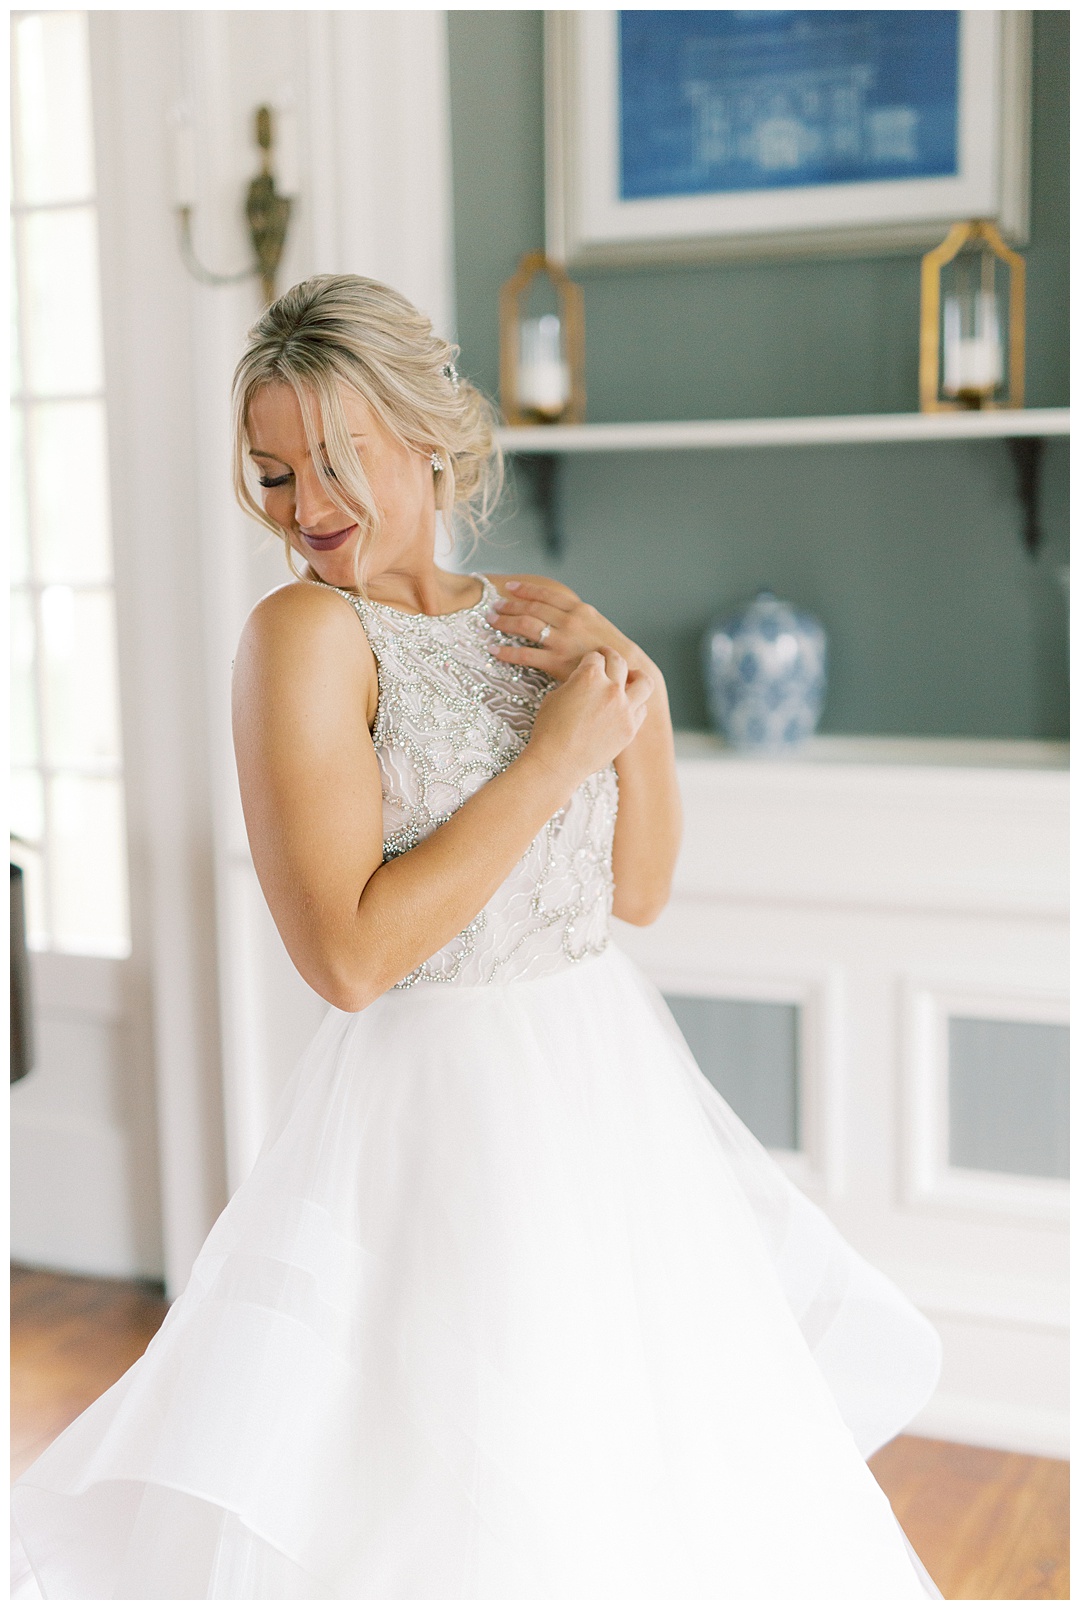 Hayley Paige Dress Lush Backyard Wedding on Film Featured on Magnolia Rouge with Sarah Sunstrom Photography